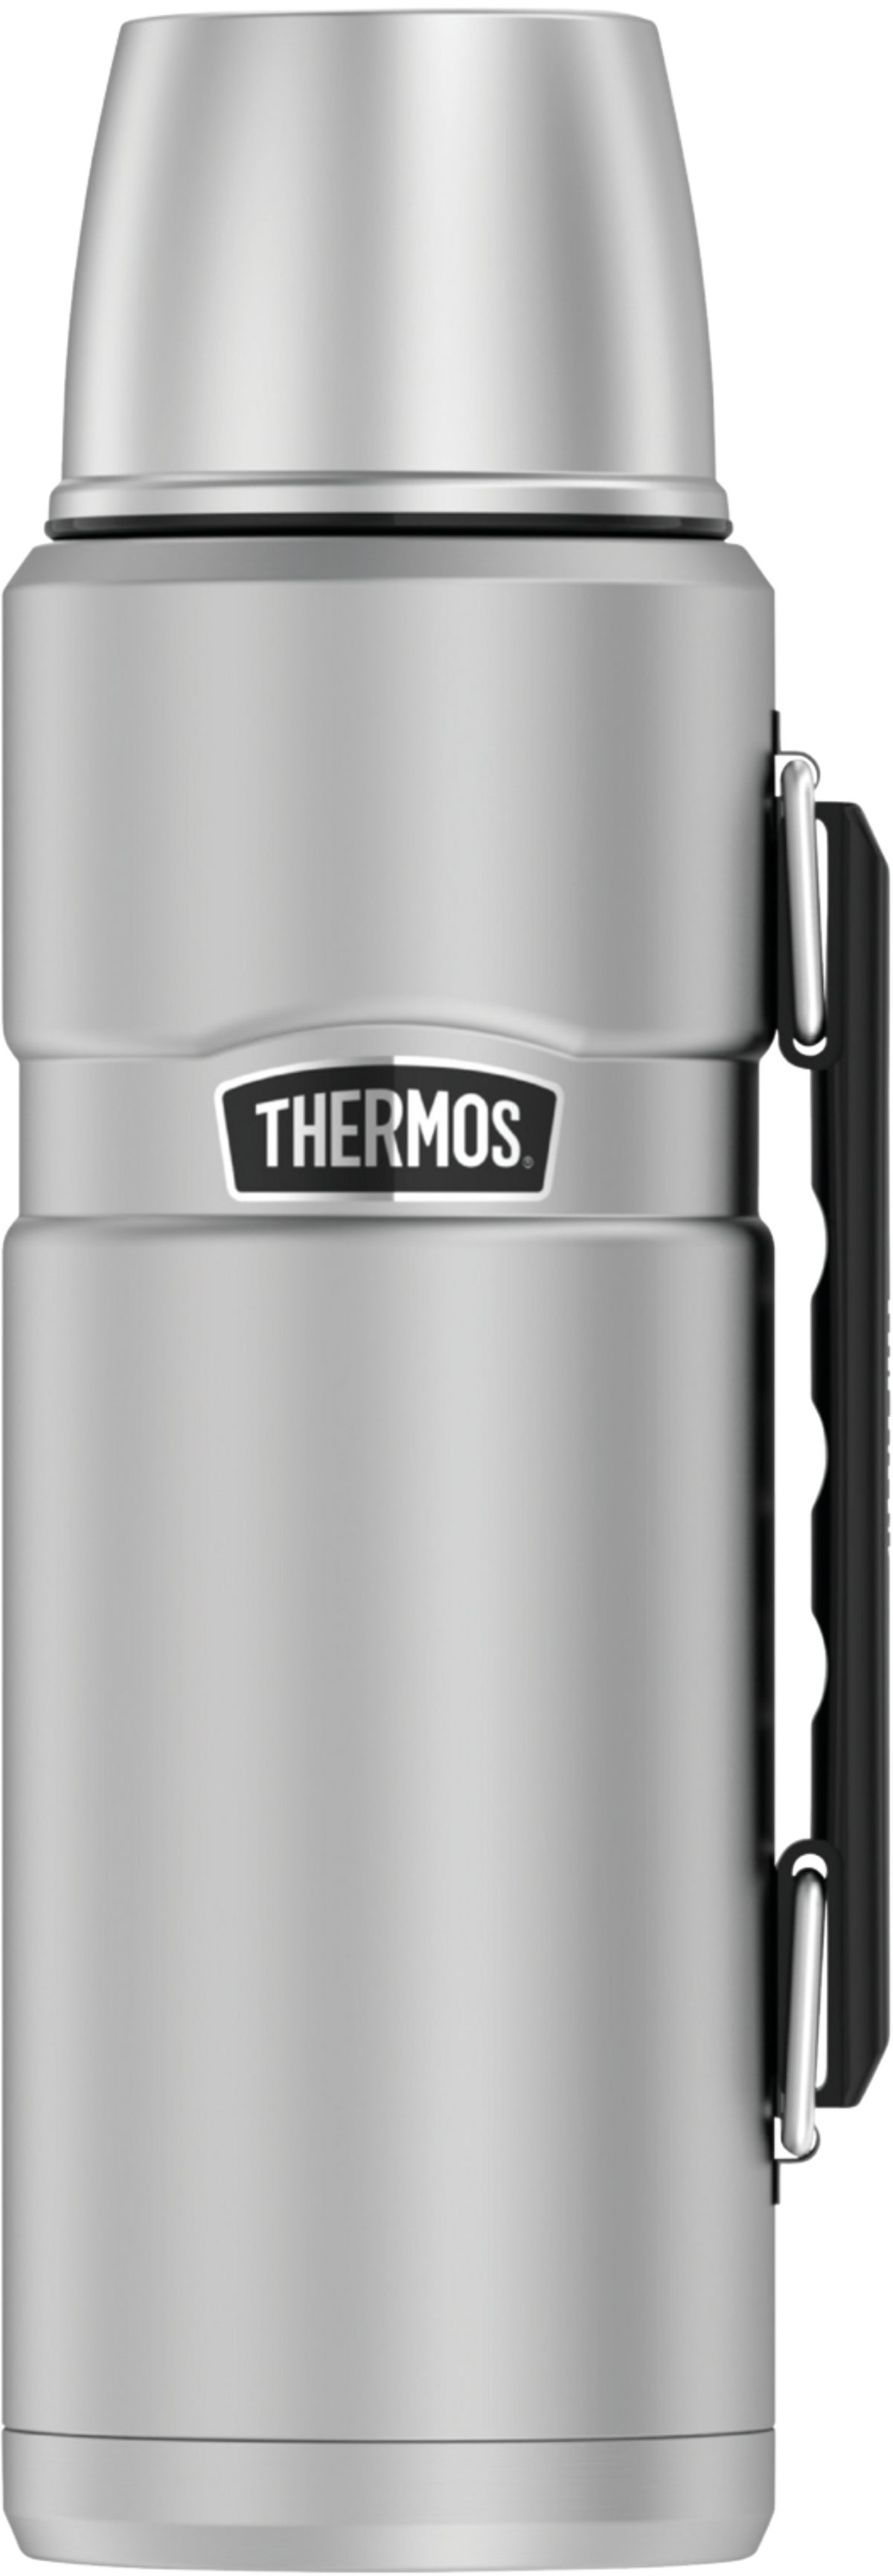 Thermos White Vacuum Insulated Glass Carafe - Valu Home Centers